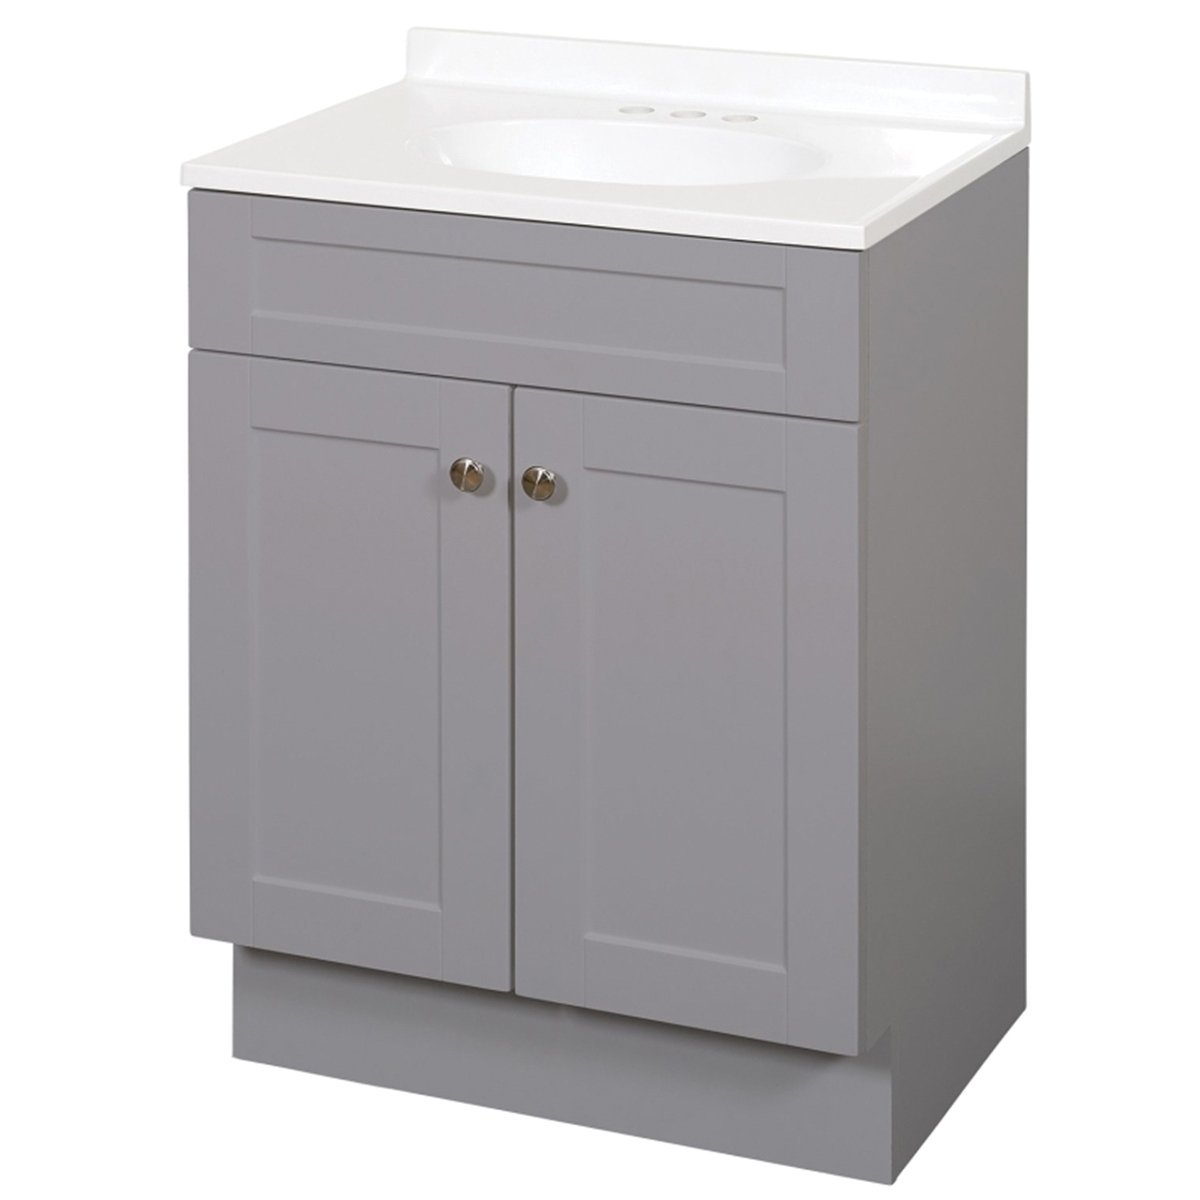 SBC24GY 2-Door Shaker Vanity with Top, Wood, Cool Gray, Cultured Marble Sink, White Sink